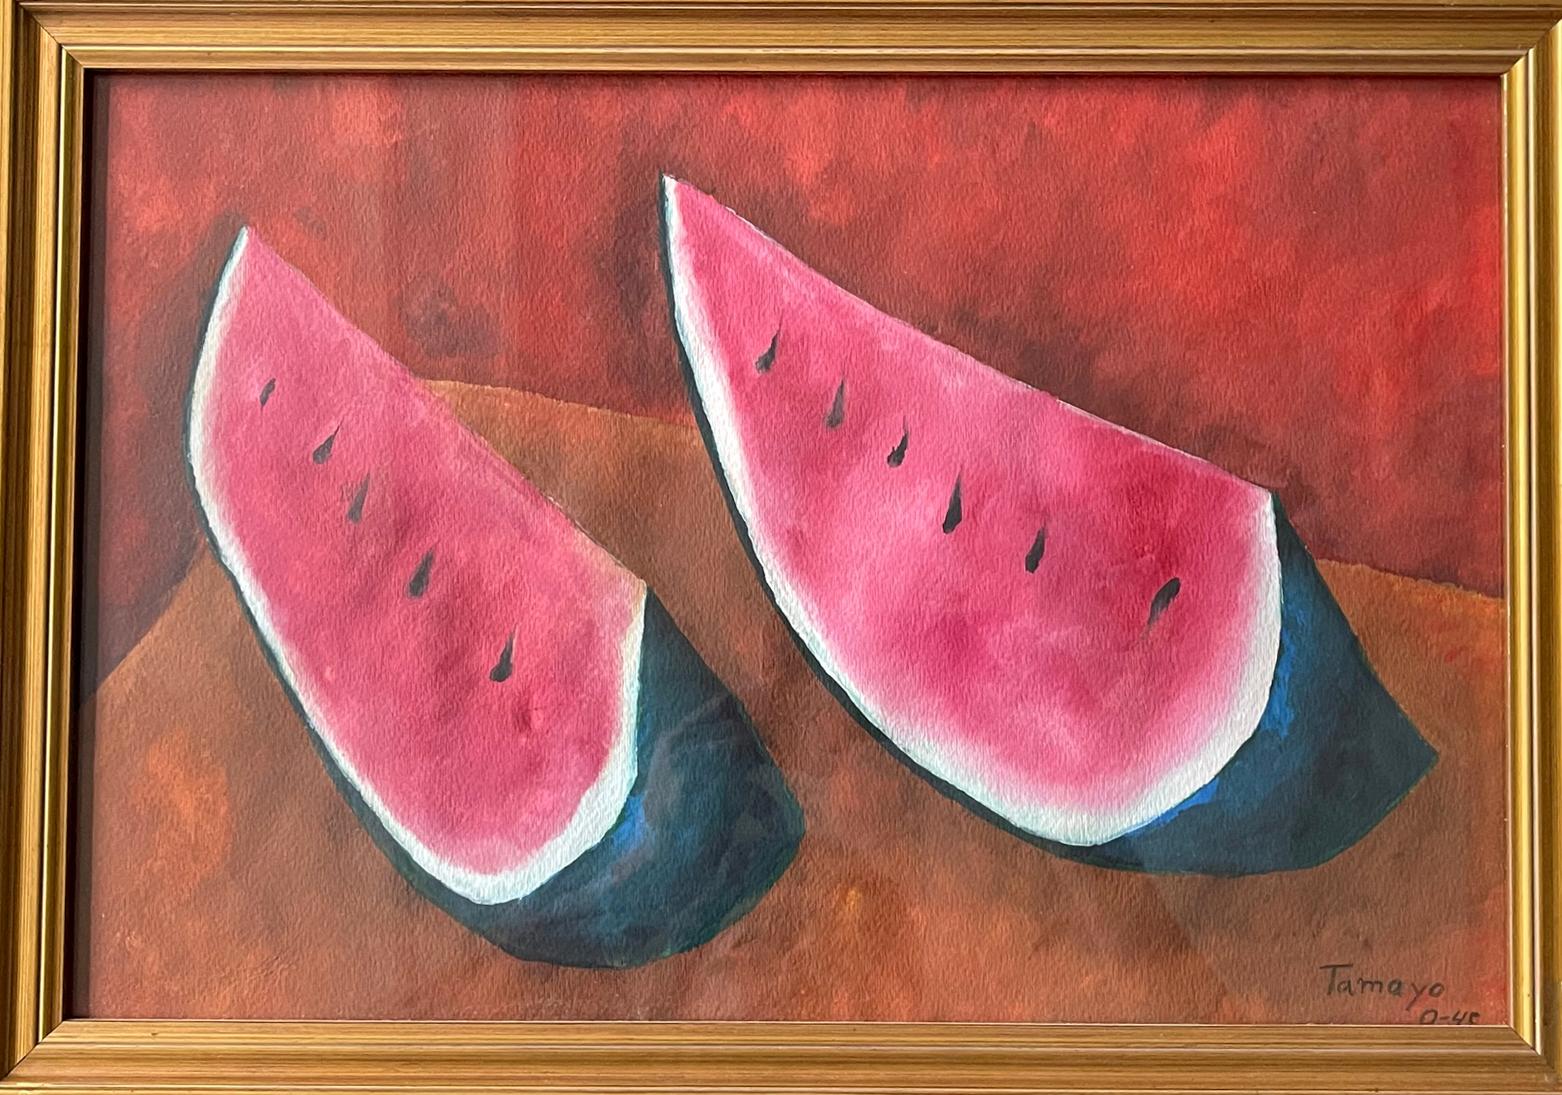 A framed watercolor and gouache on paper depicting sliced watermelon on a color block background, signed Tamayo and dated 1945 as shown. The work was in keeping with the style of Rufino Tamayo and it retains a paper label from Salon de la Plastica